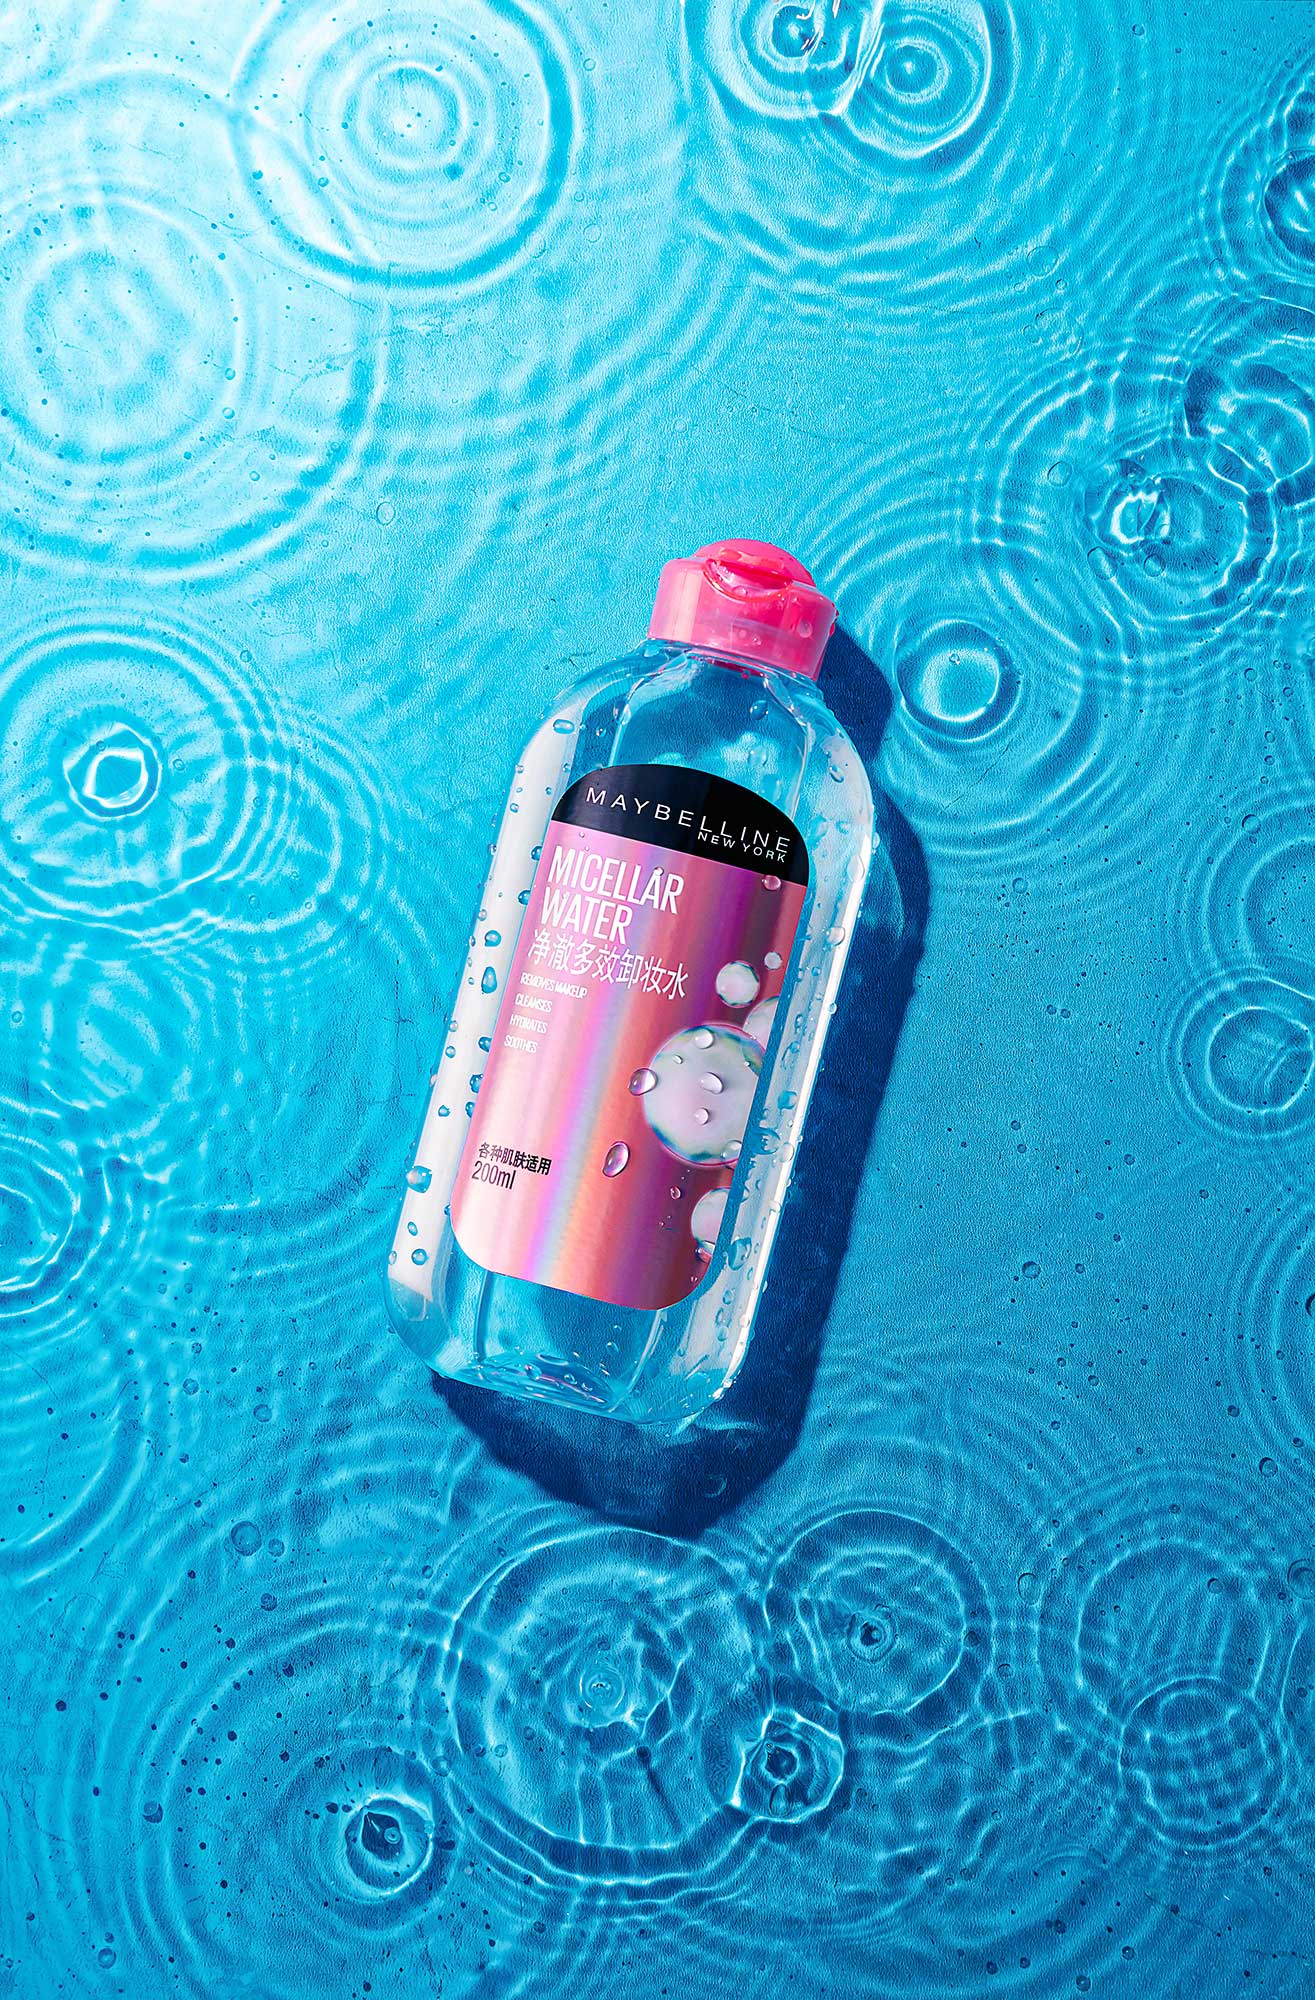 Maybelline-Micellar-Water-03